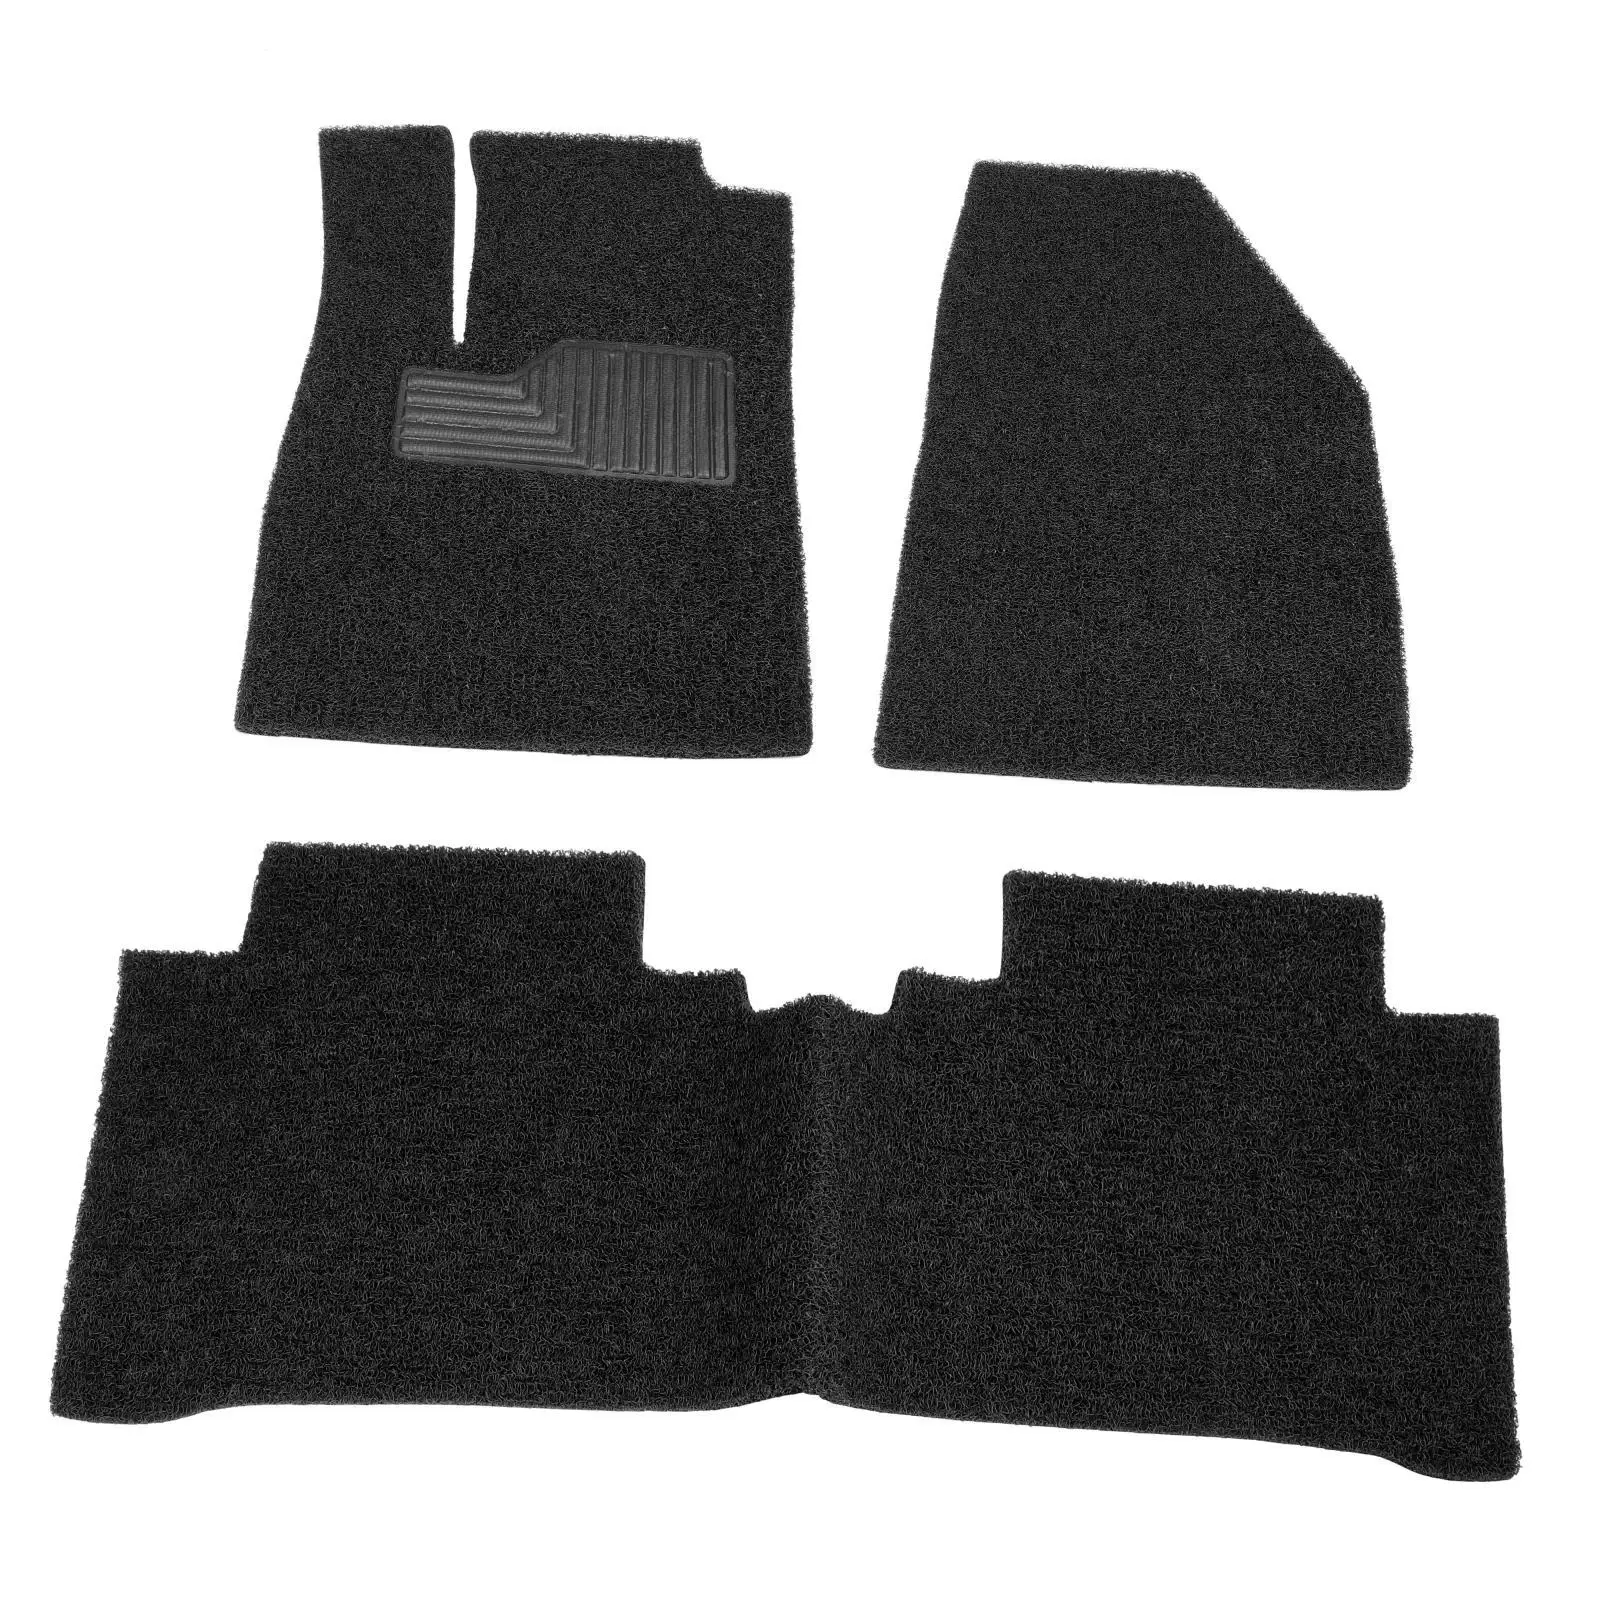 3x Automotive Floor Mats Practical Protection Easy to Clean Portable PVC Durable for Byd Yuan Plus Atto 3 21-23